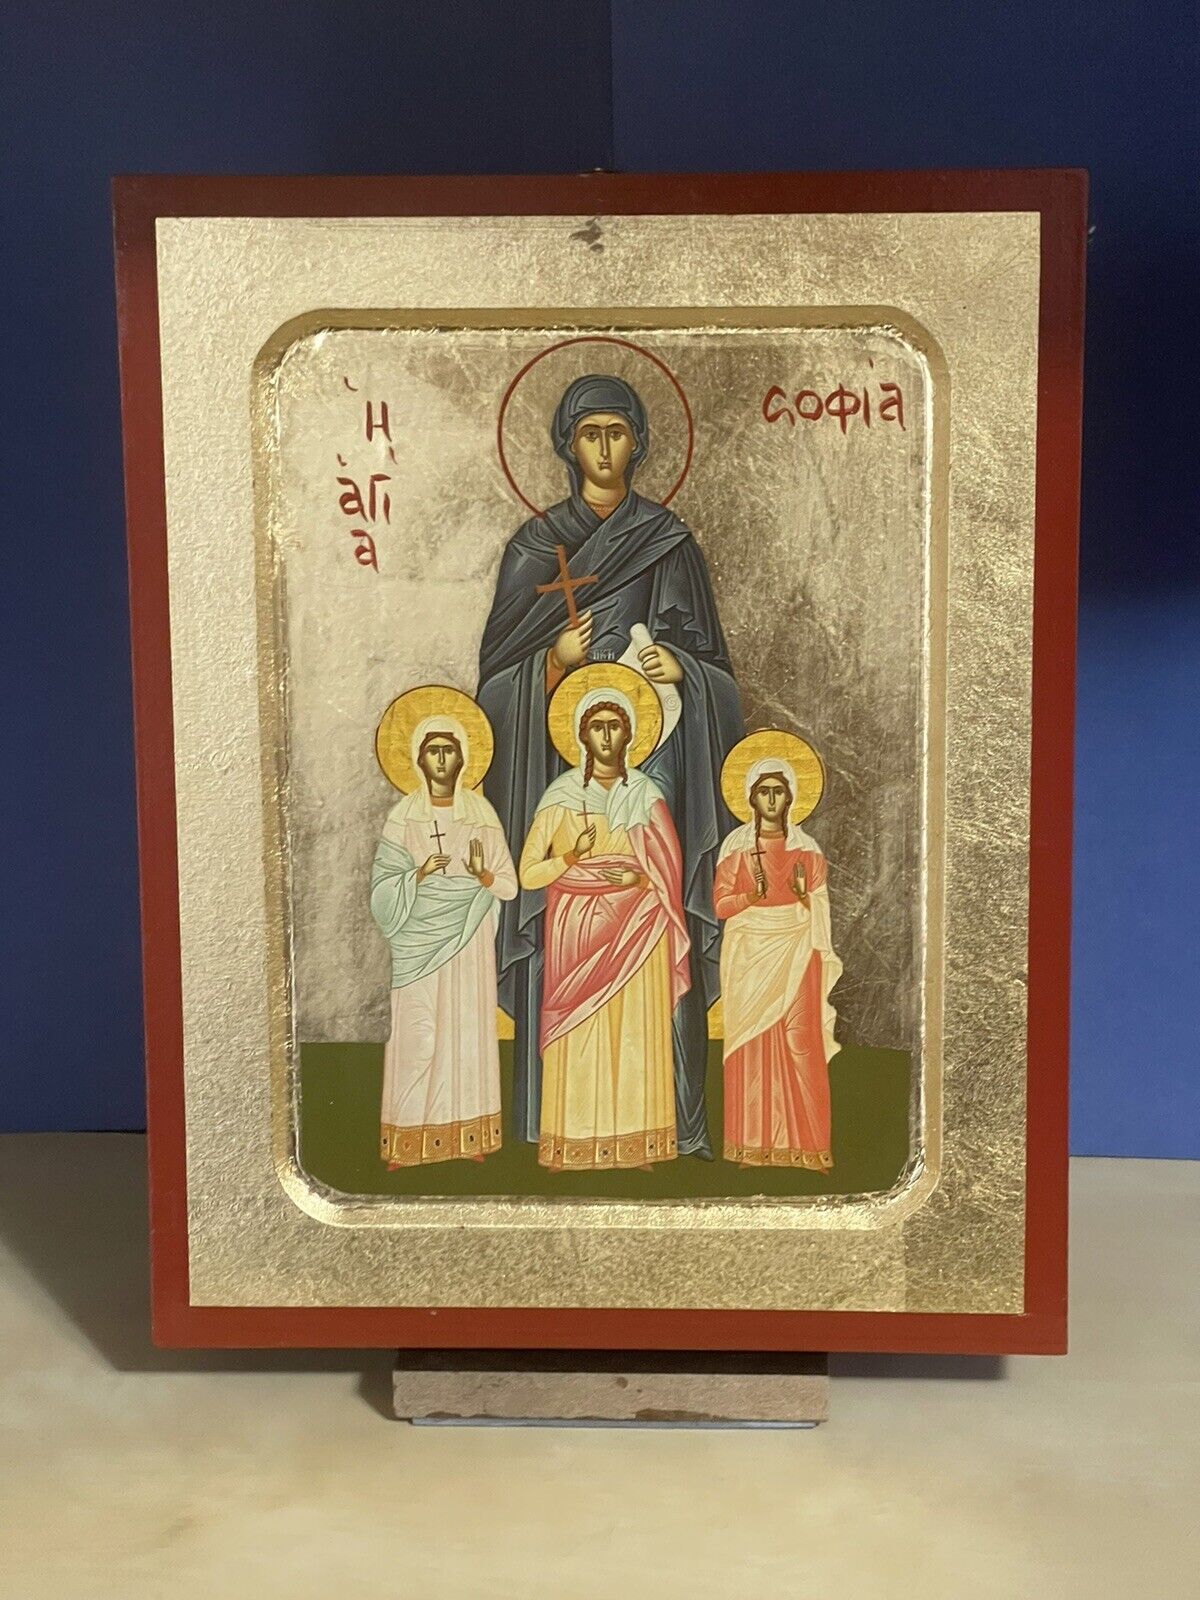 Saint Sophia and her Daughters-Greek Rusia, Orthodox Wooden Cared Icon 8x10